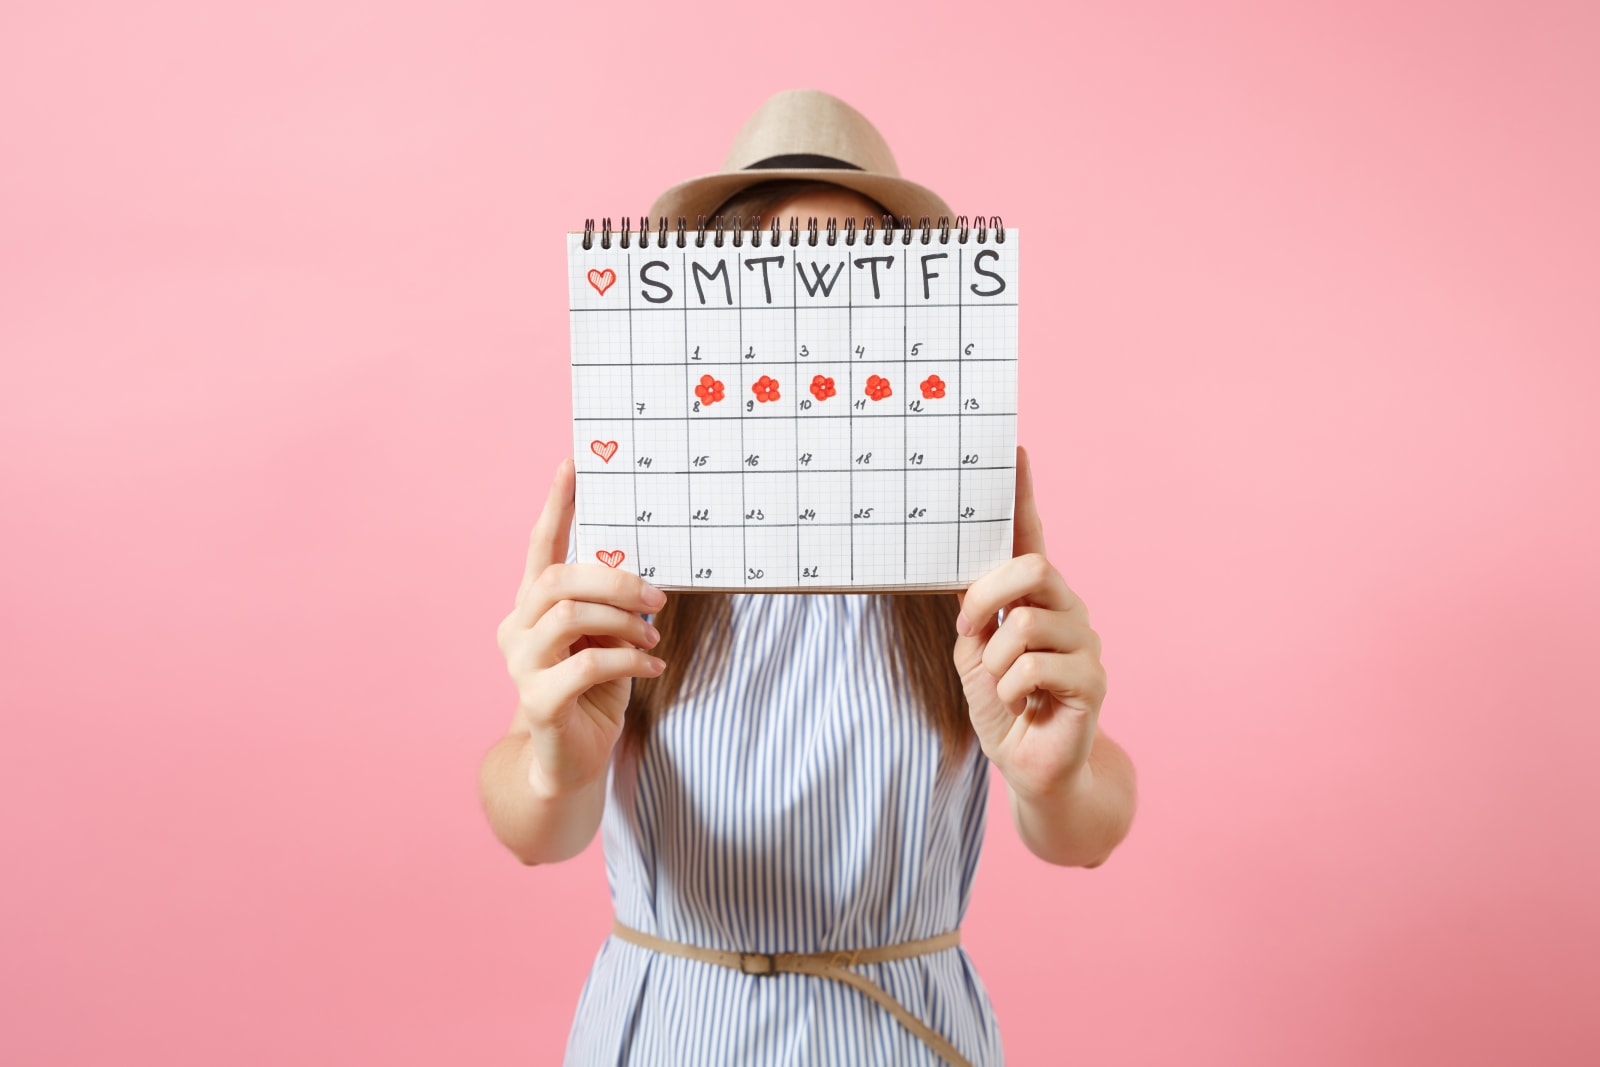 Portrait of woman in blue dress cover face, hiding behind periods calendar for checking menstruation days isolated on trending pink background. Medical, healthcare, gynecological concept. Copy space.